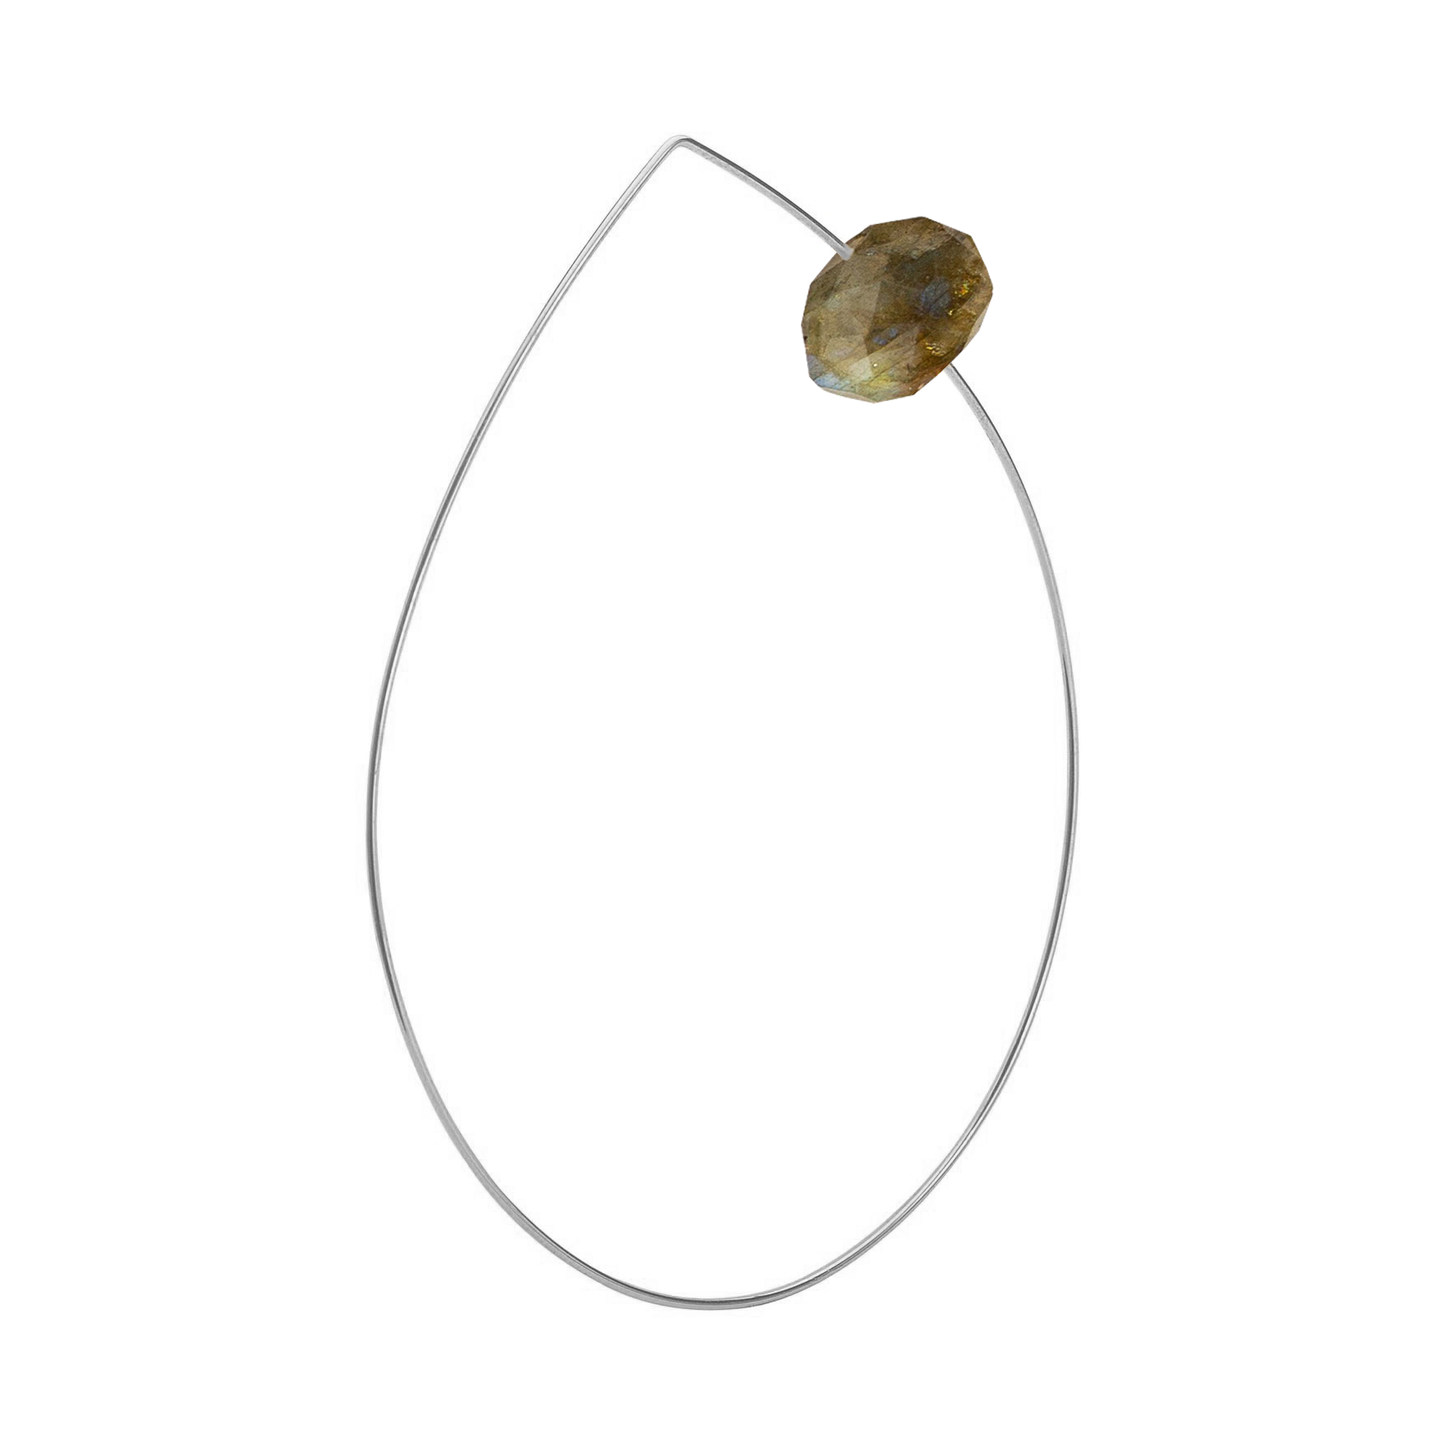 Pointed Curve Bangle with hand-cut precious gemstones